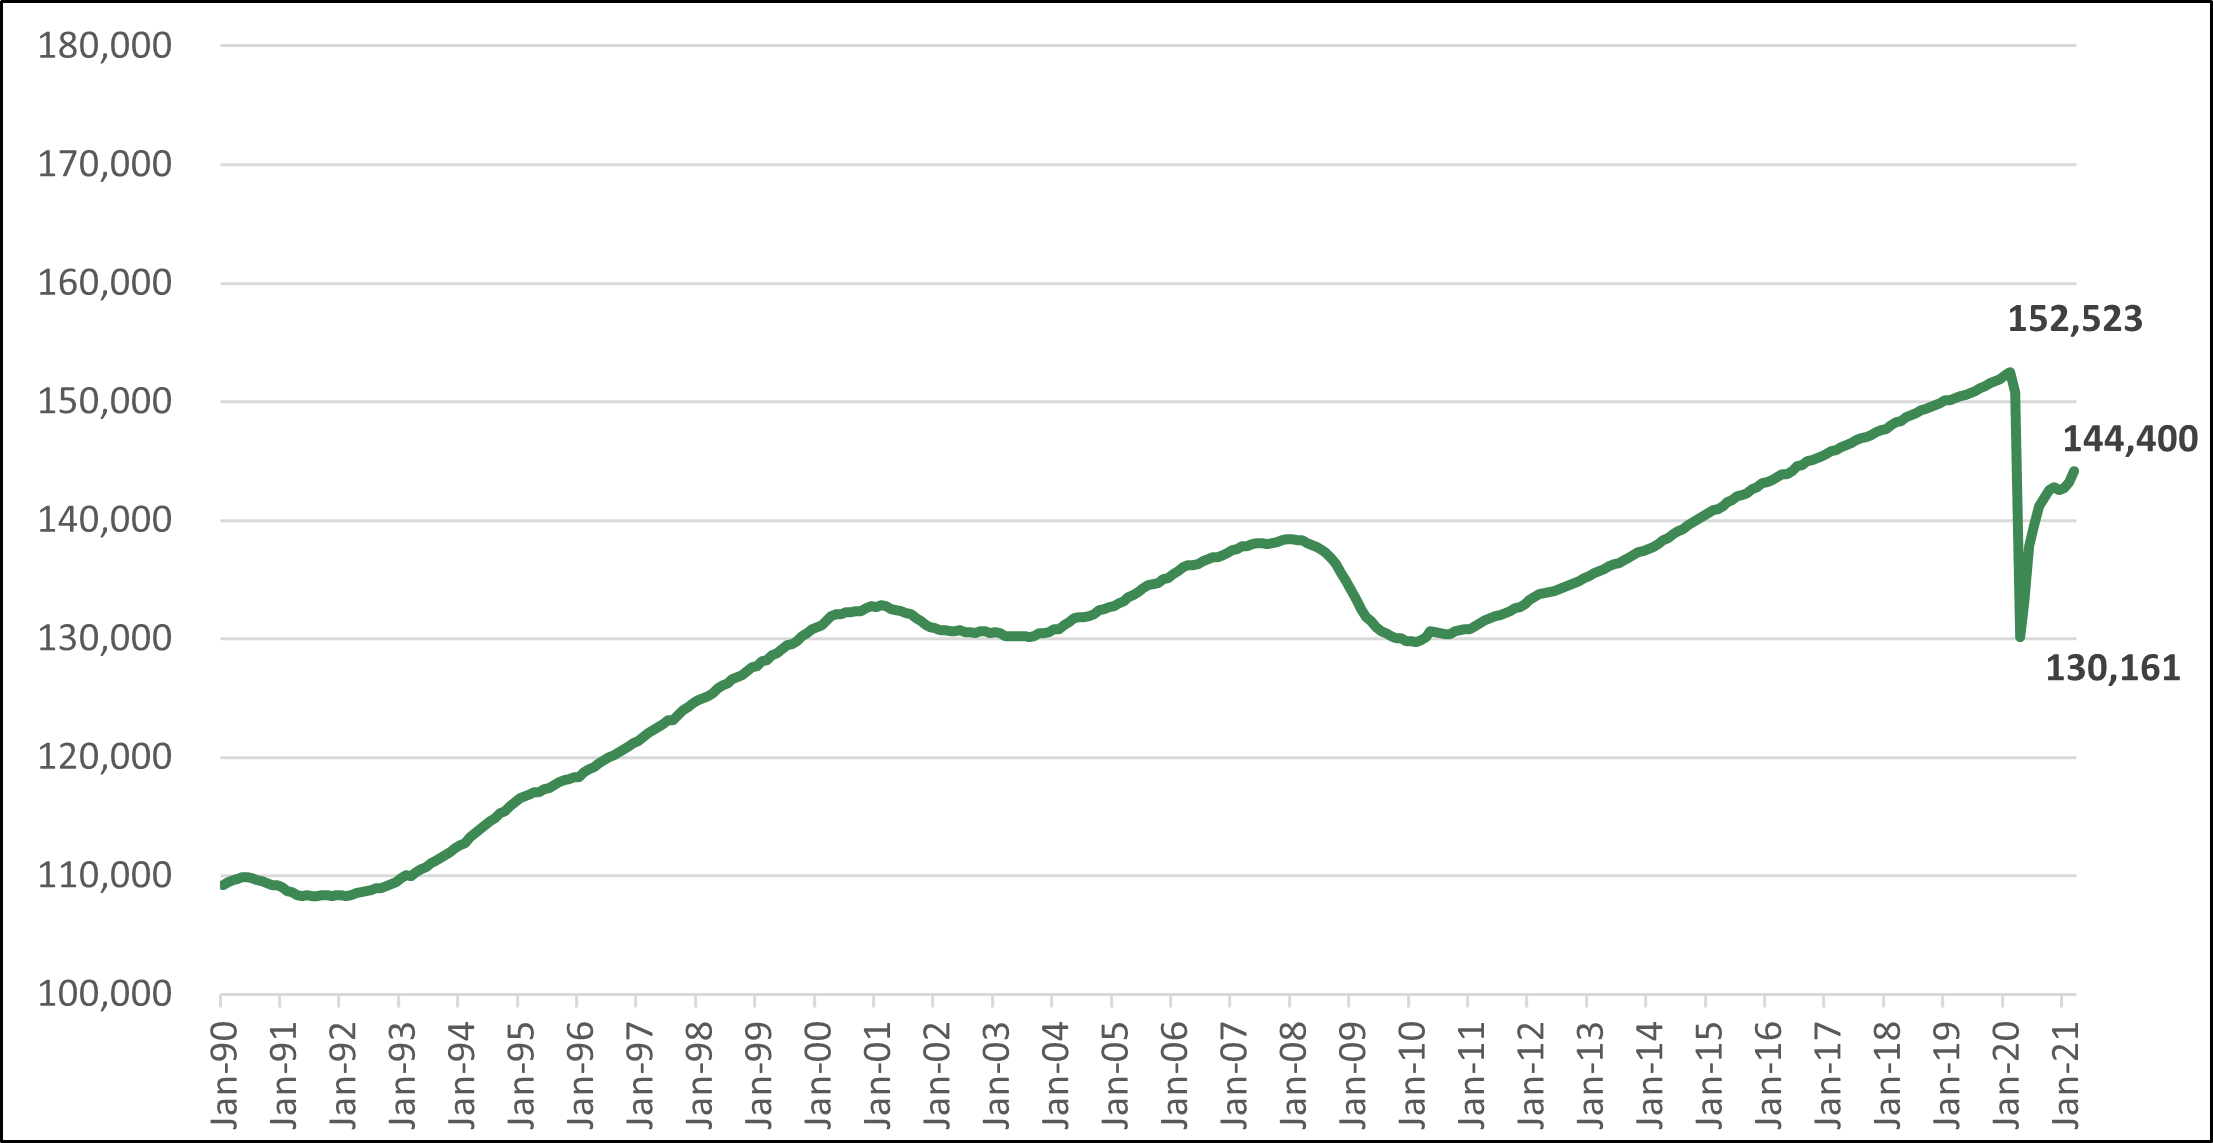 Chart depicting total non-farm US Payrolls in millions from January 1990 to January 2021